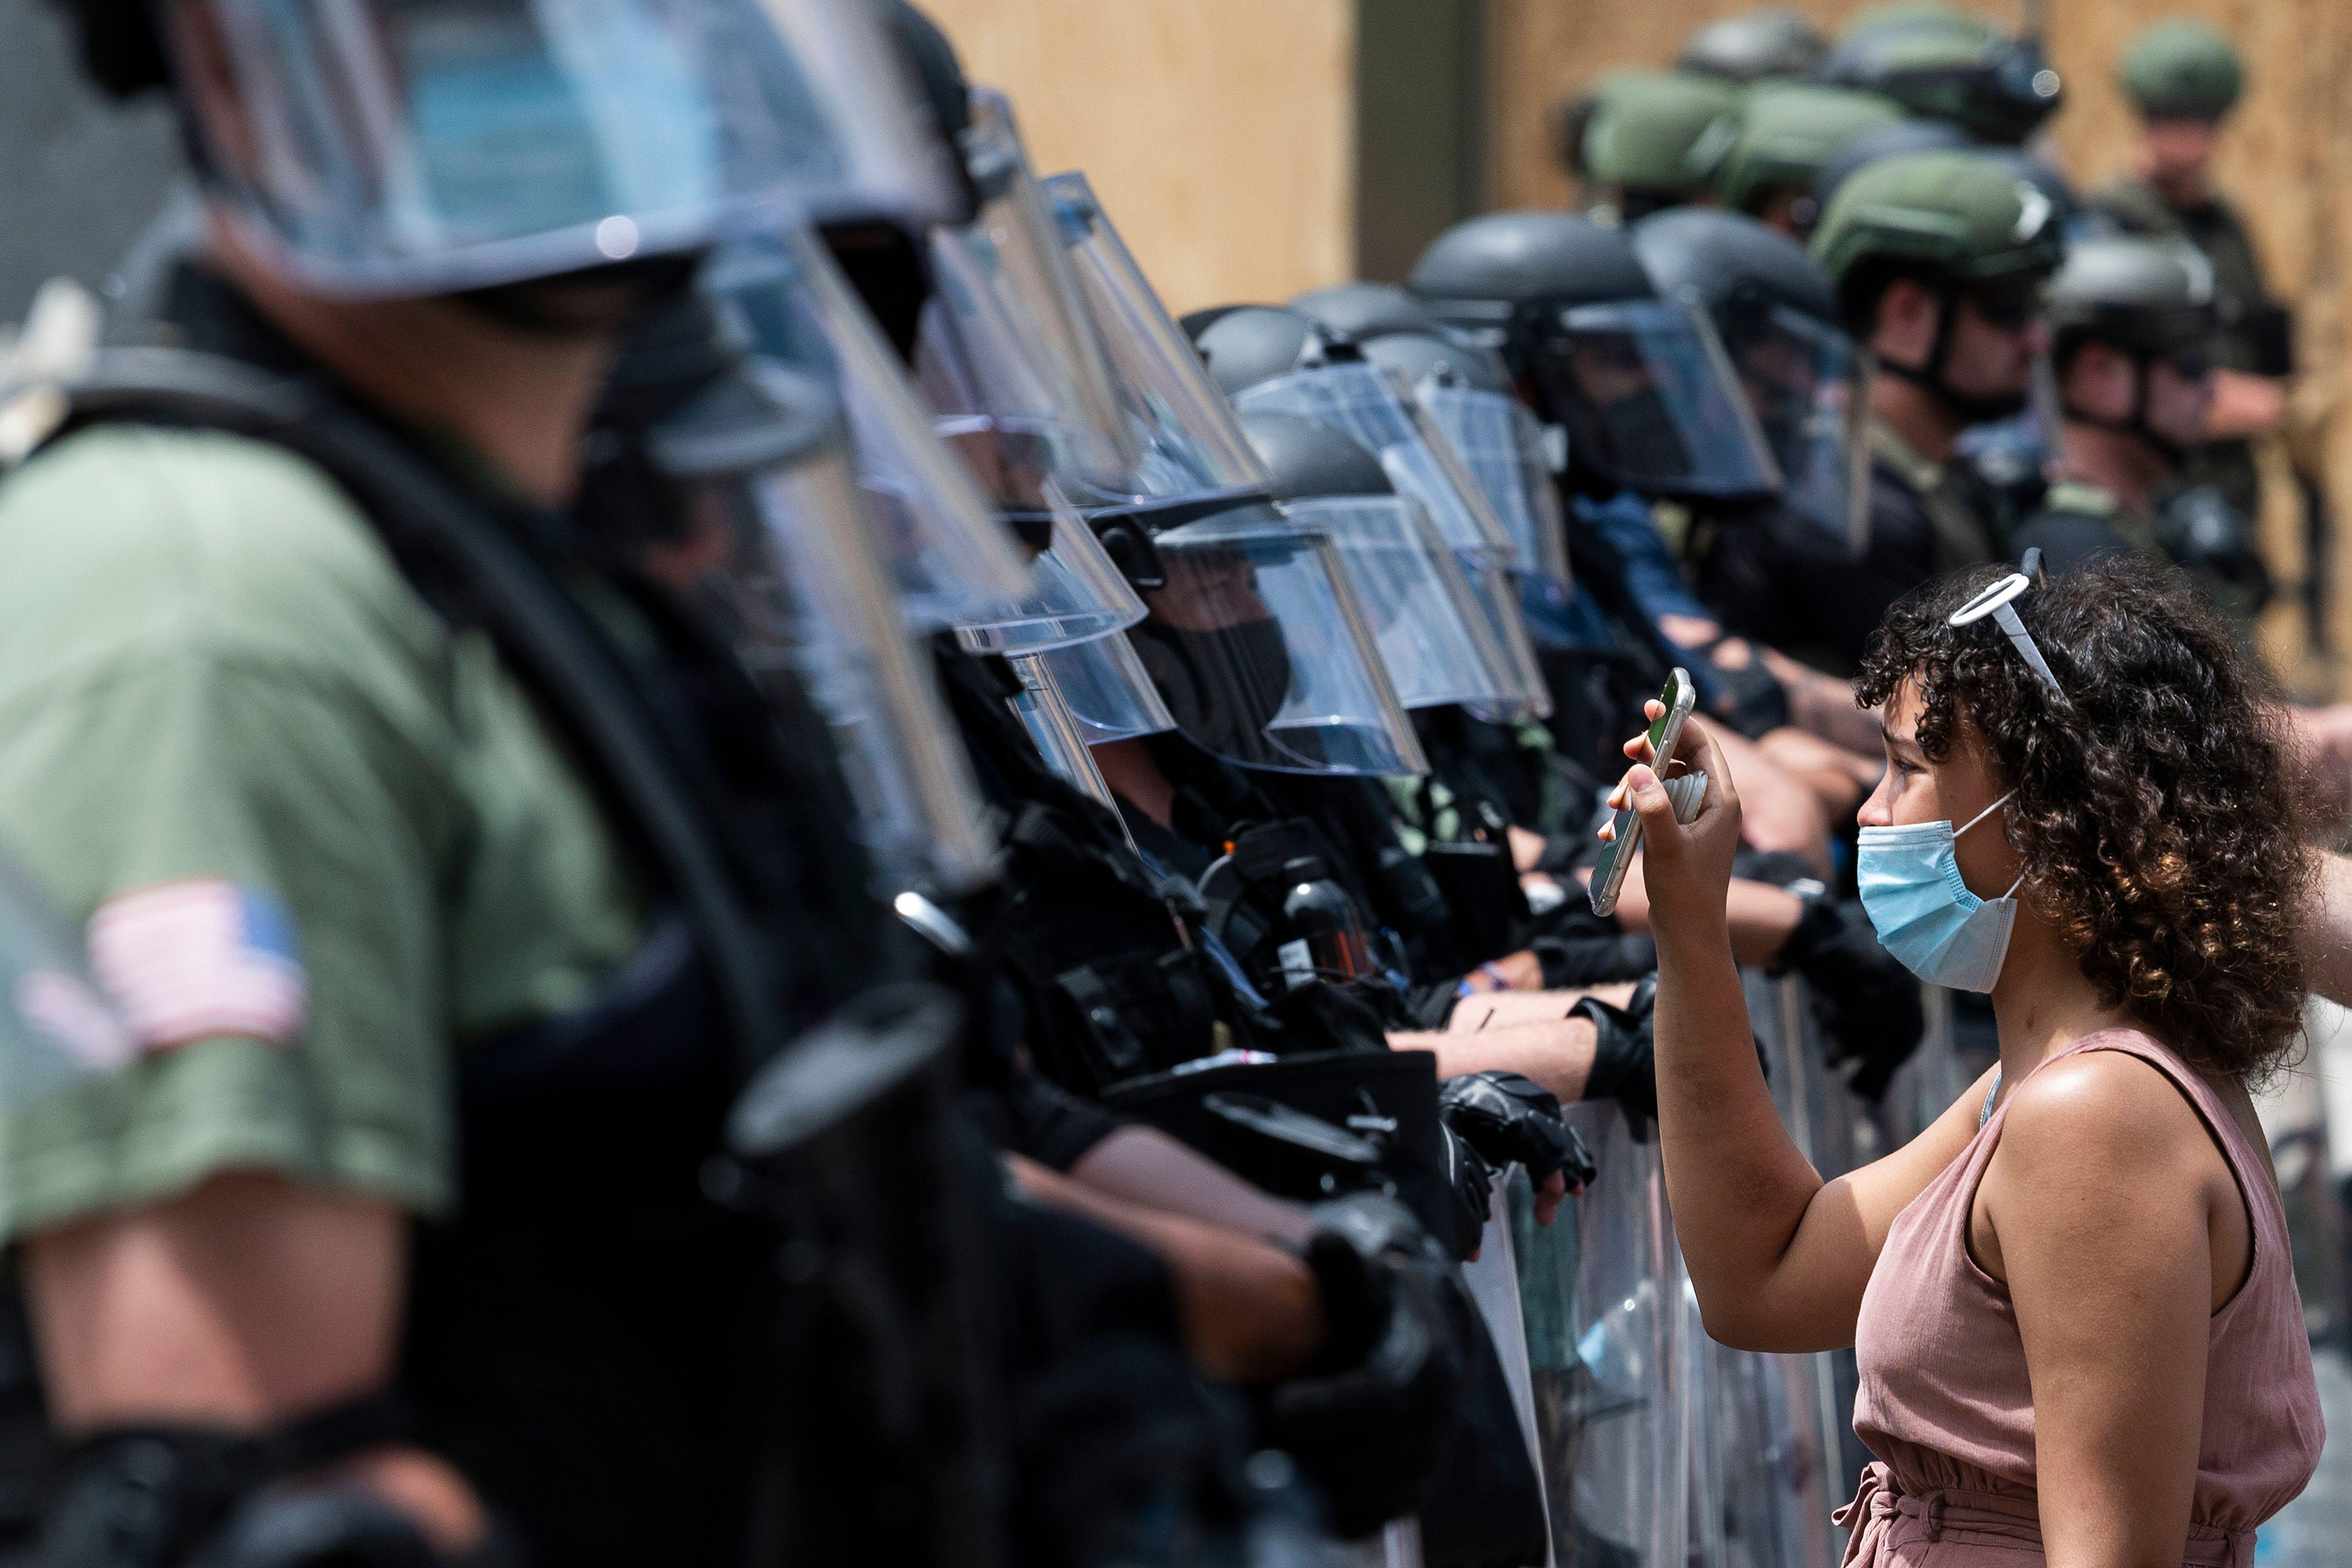 A protester shows a cellphone to a row of law enforcement officers.